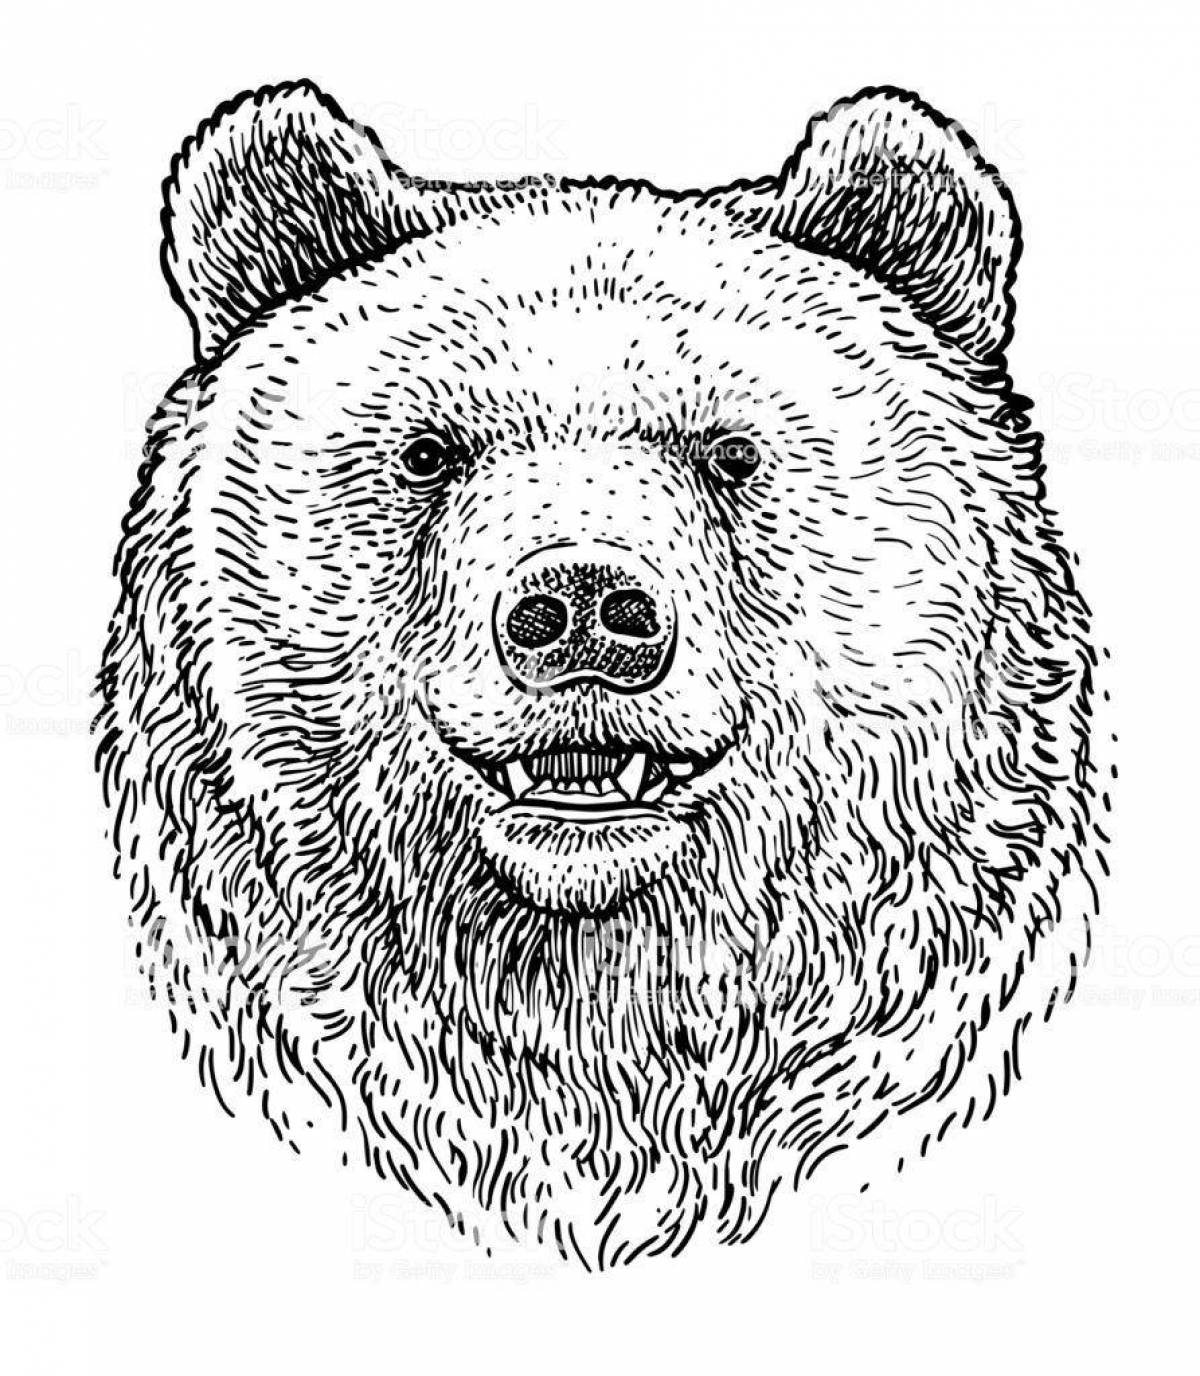 Cute bear head coloring page